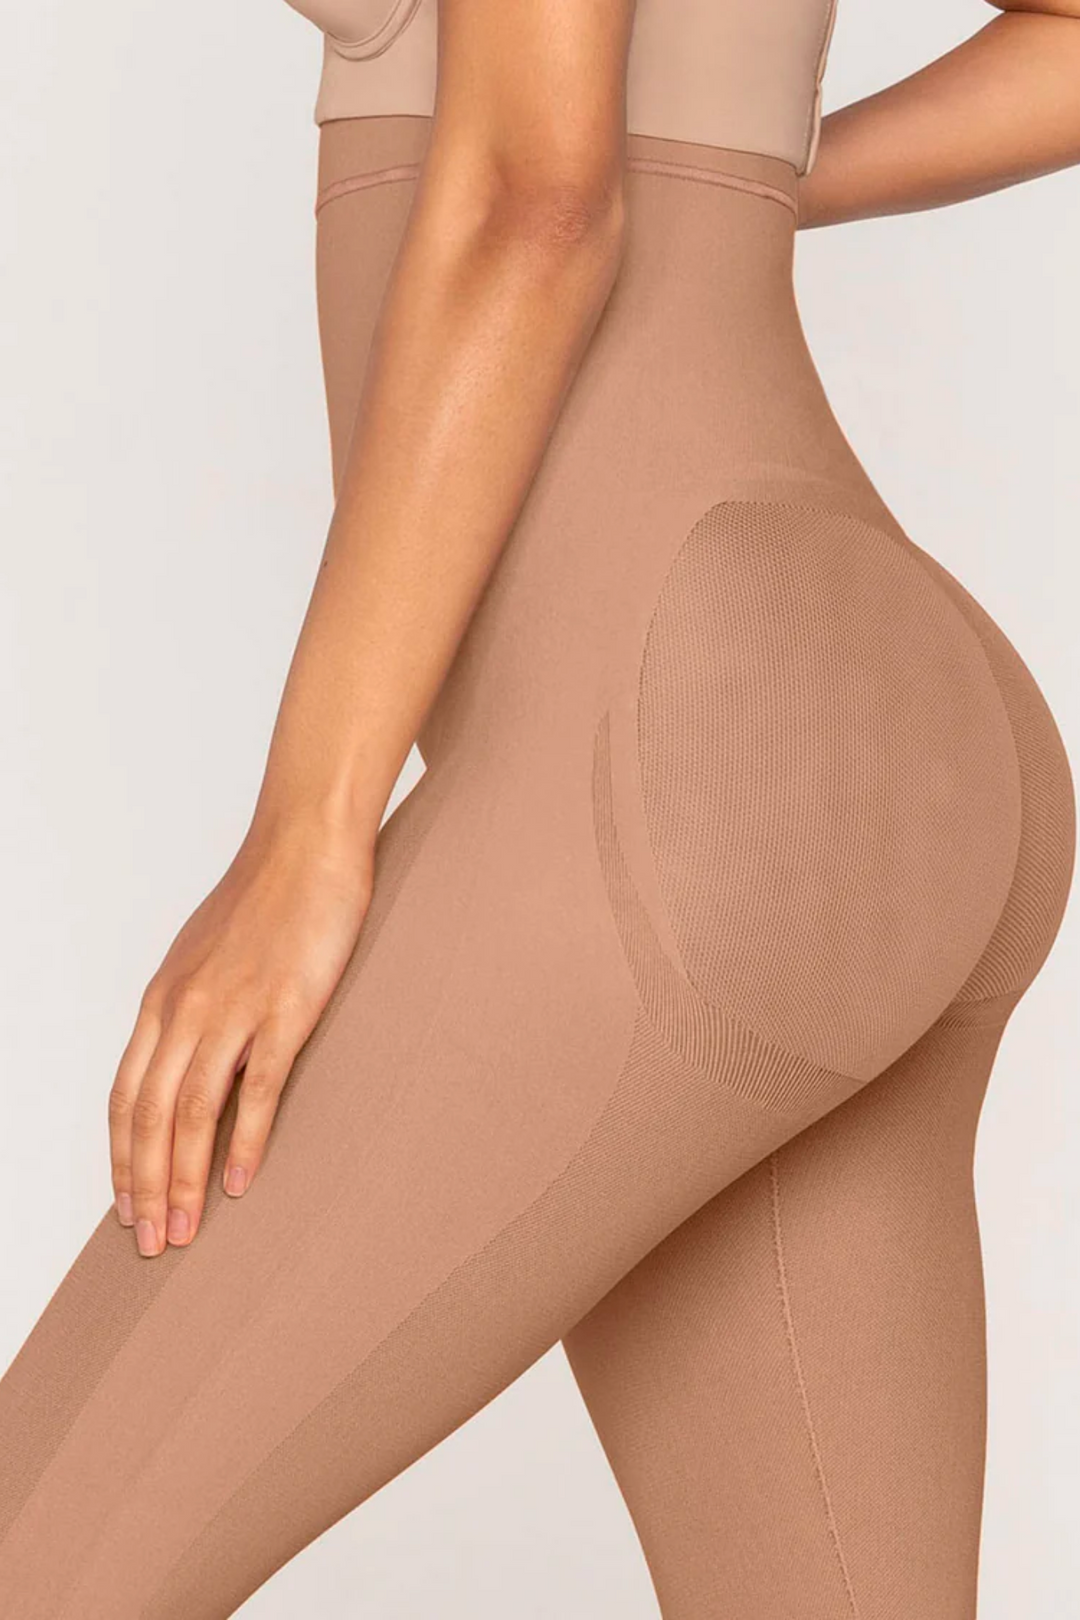 Invisible Body Shaper with Leg Compression and Butt Lifter